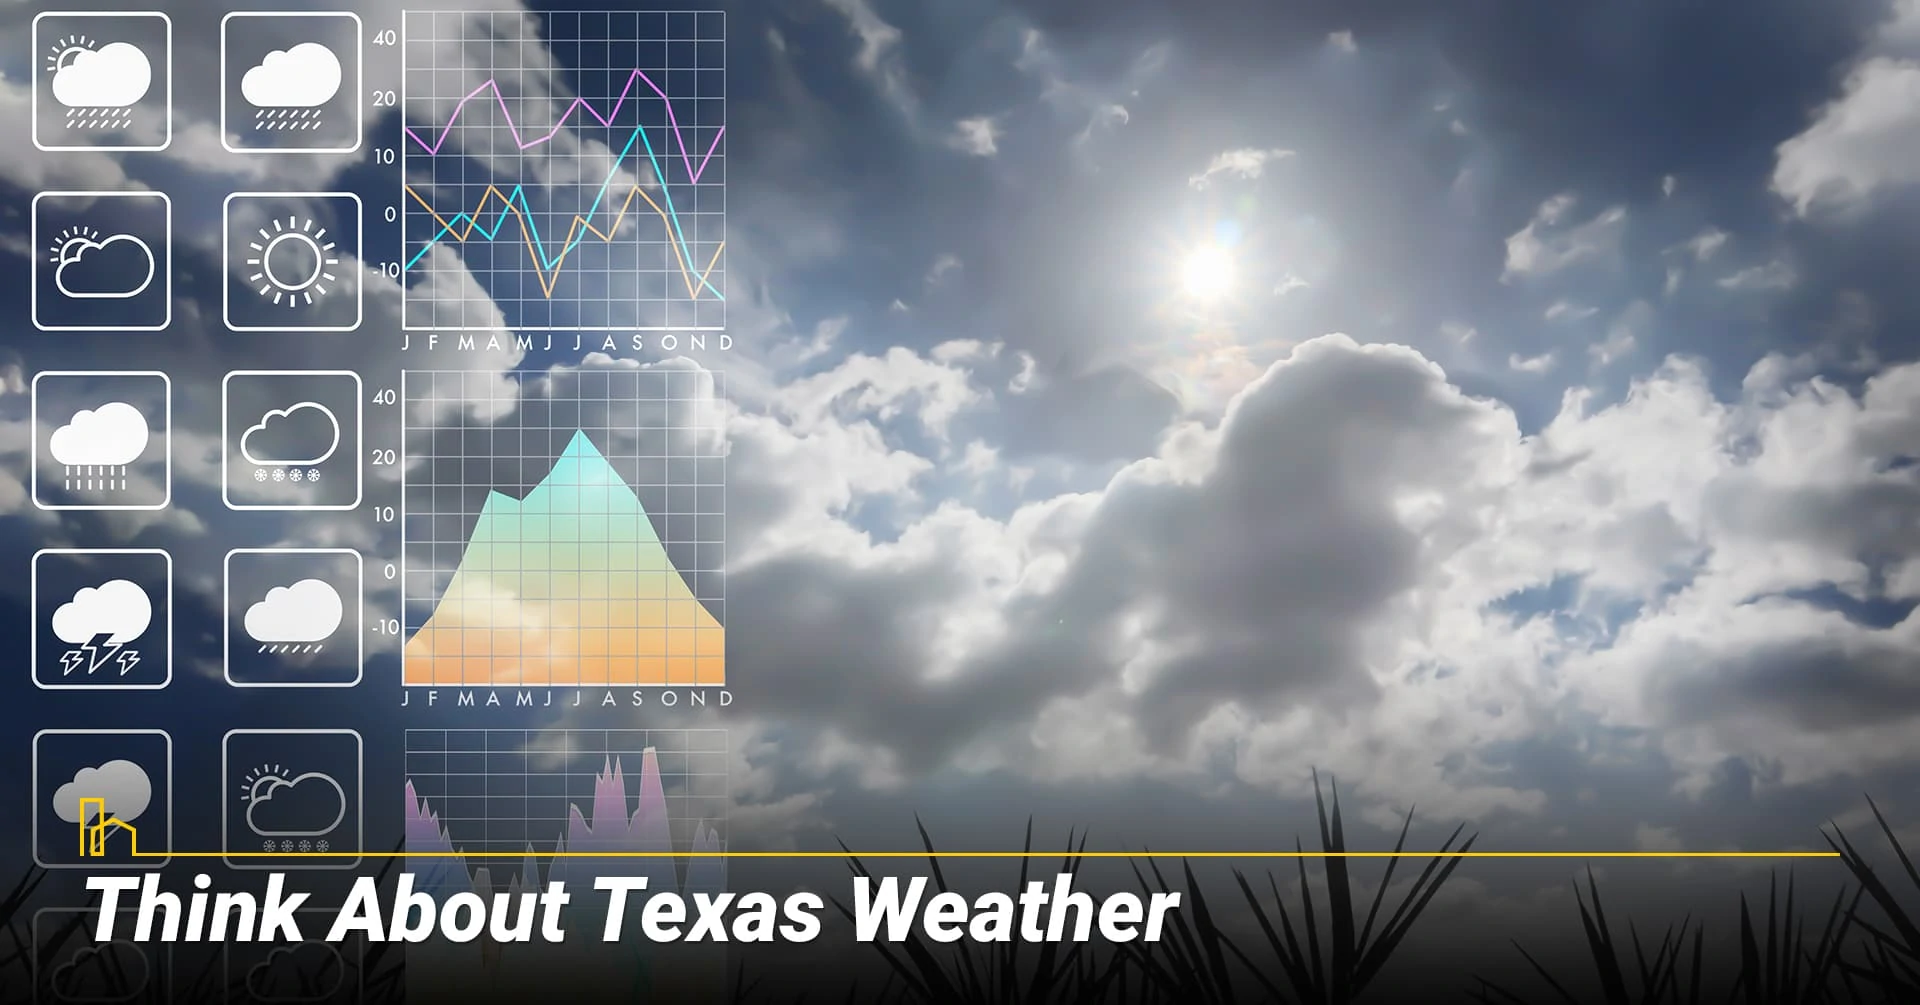 Think About Texas Weather, consider local weather